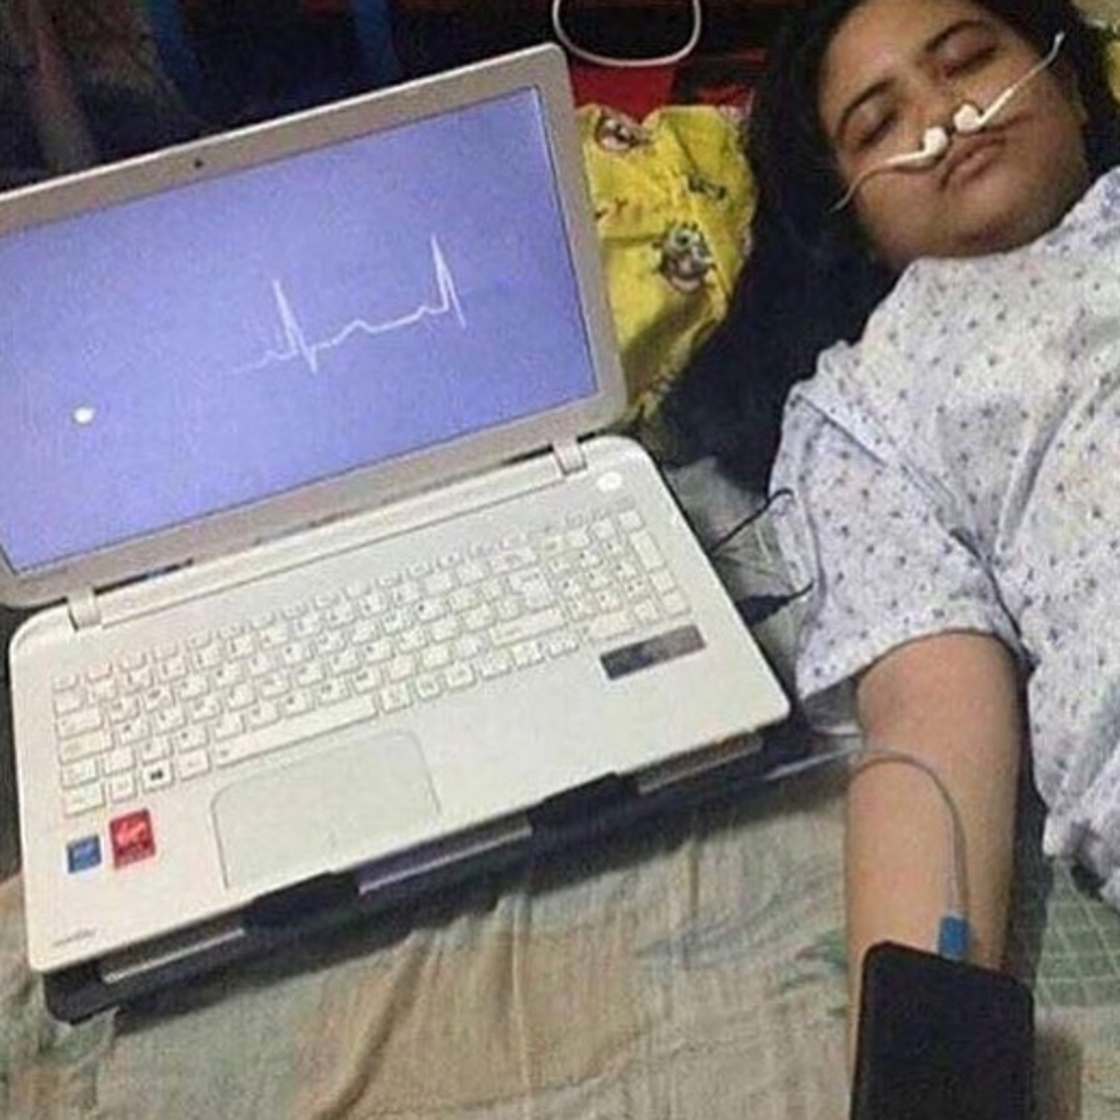 Girl who looks like she is dying but upon closer inspection it is just a computer screen and her phone and the nose pieces are her headphones.